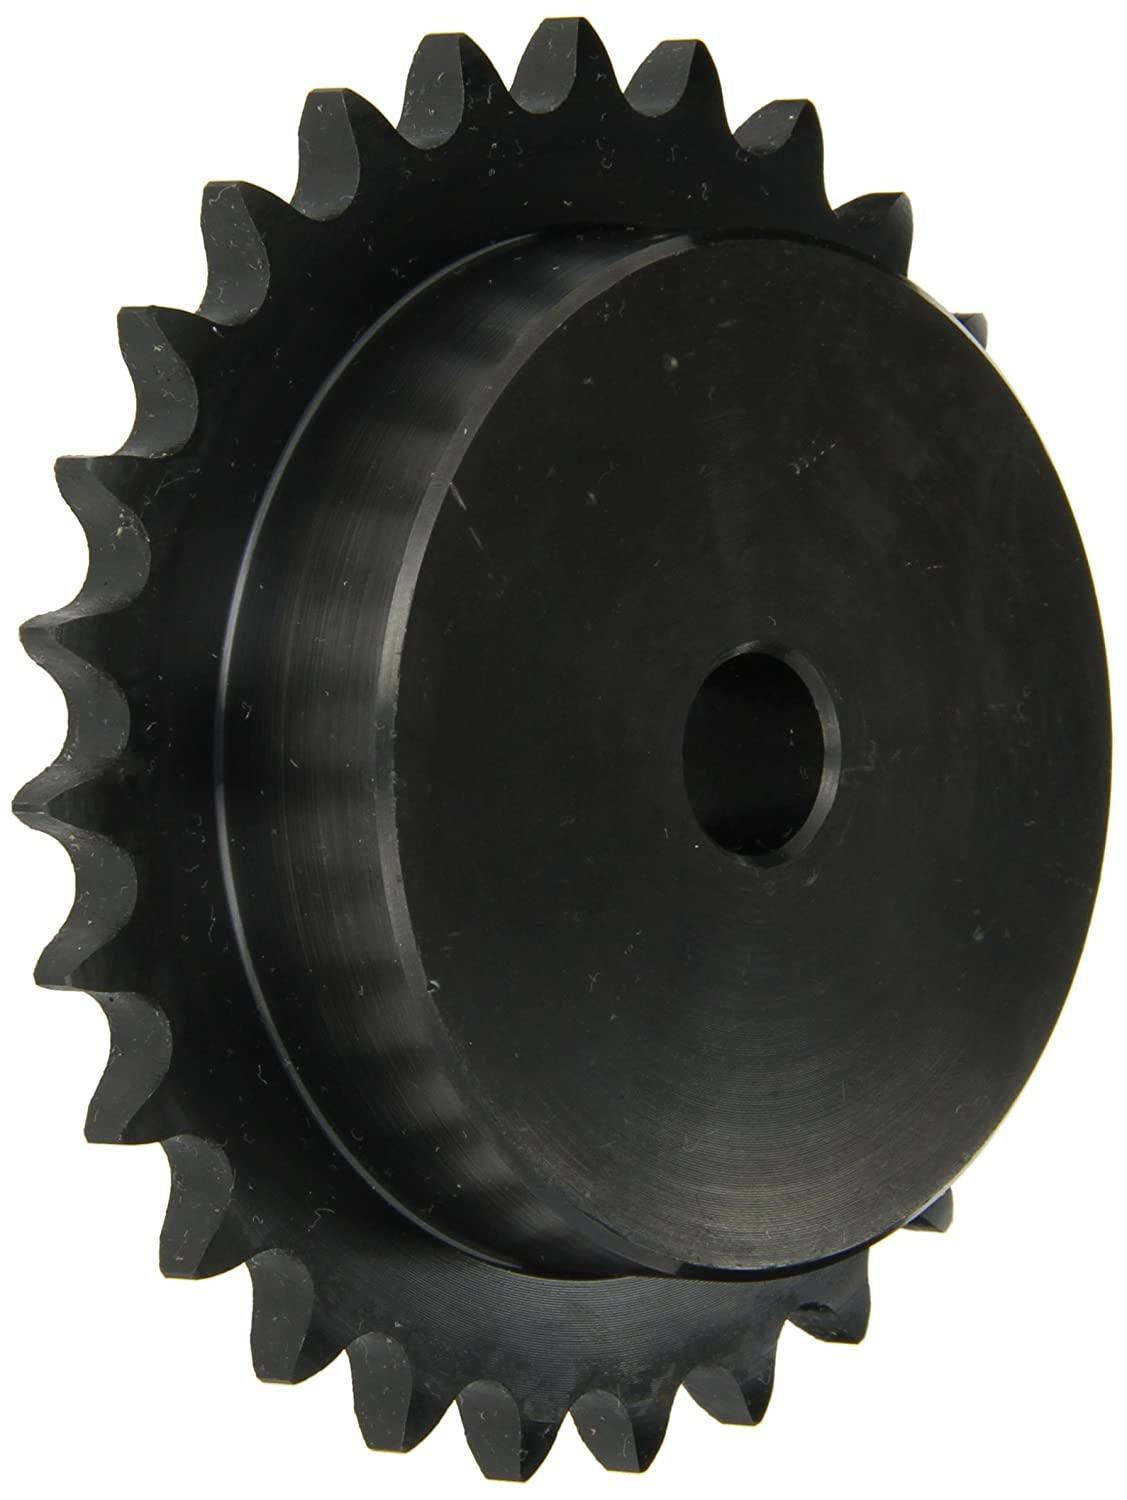 25B30 Roller Chain Sprocket With Stock Bore - Forces Inc